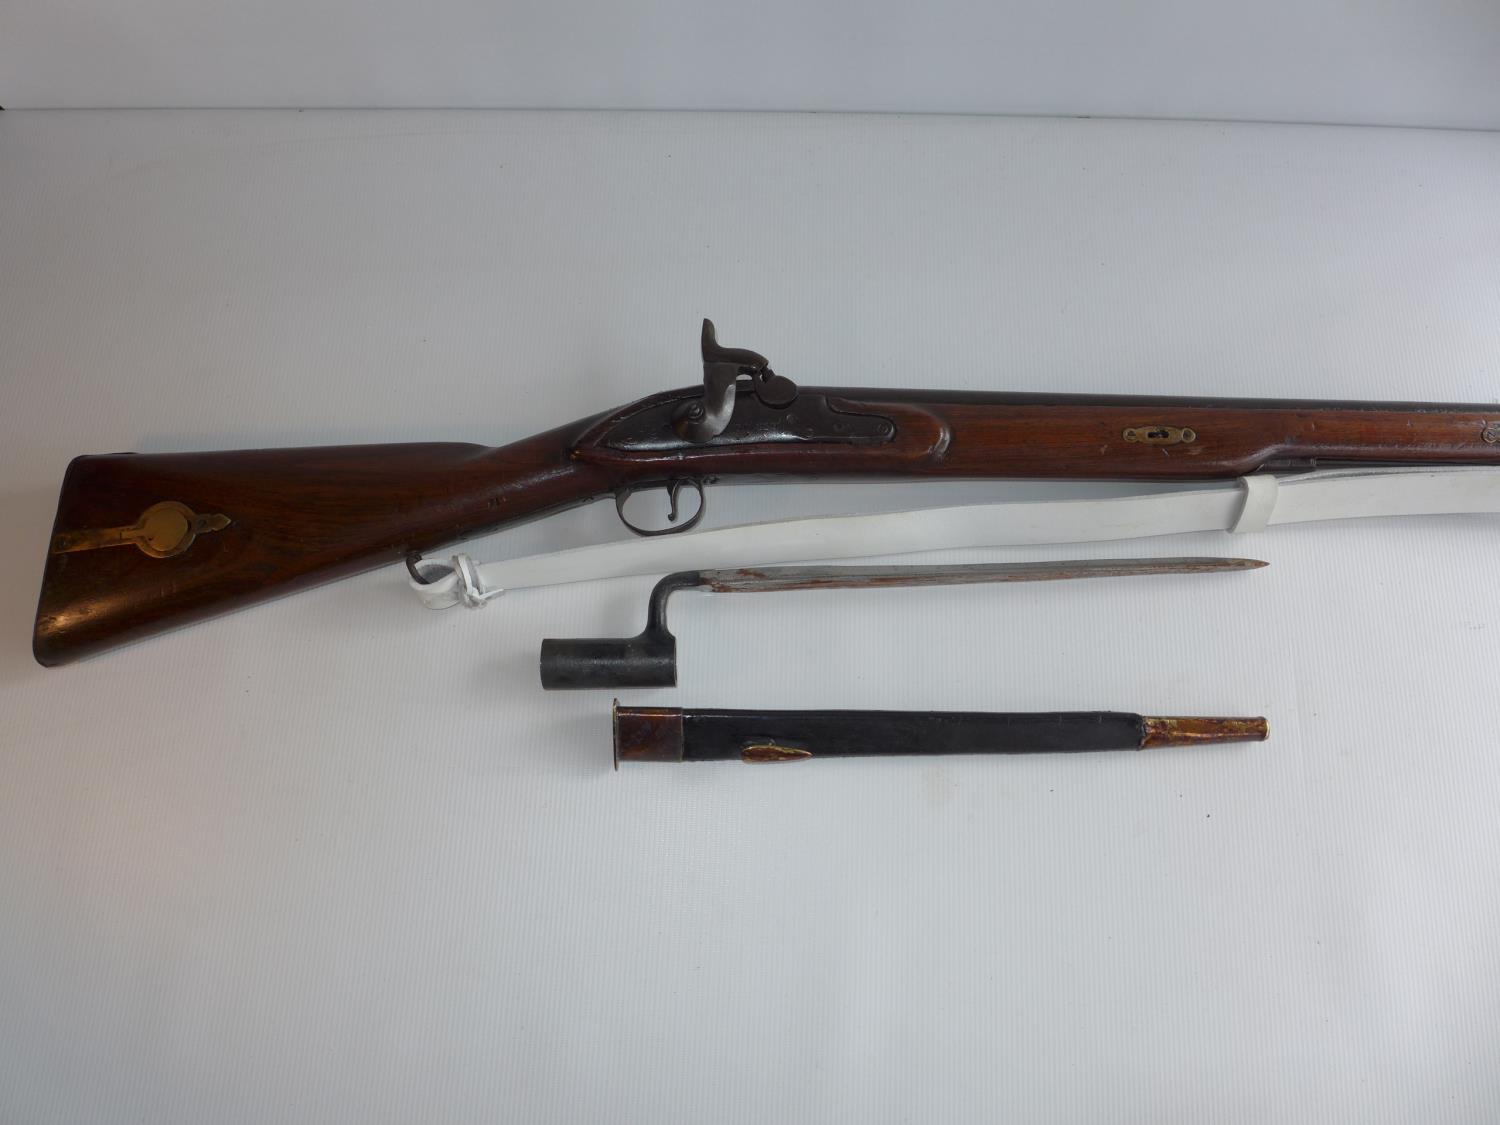 AN EAST INDIA COMPANY PERCUSSION CAP BROWN BESS MUSKET AND BAYONET, LOCK MARKED HURST, LENGTH OF